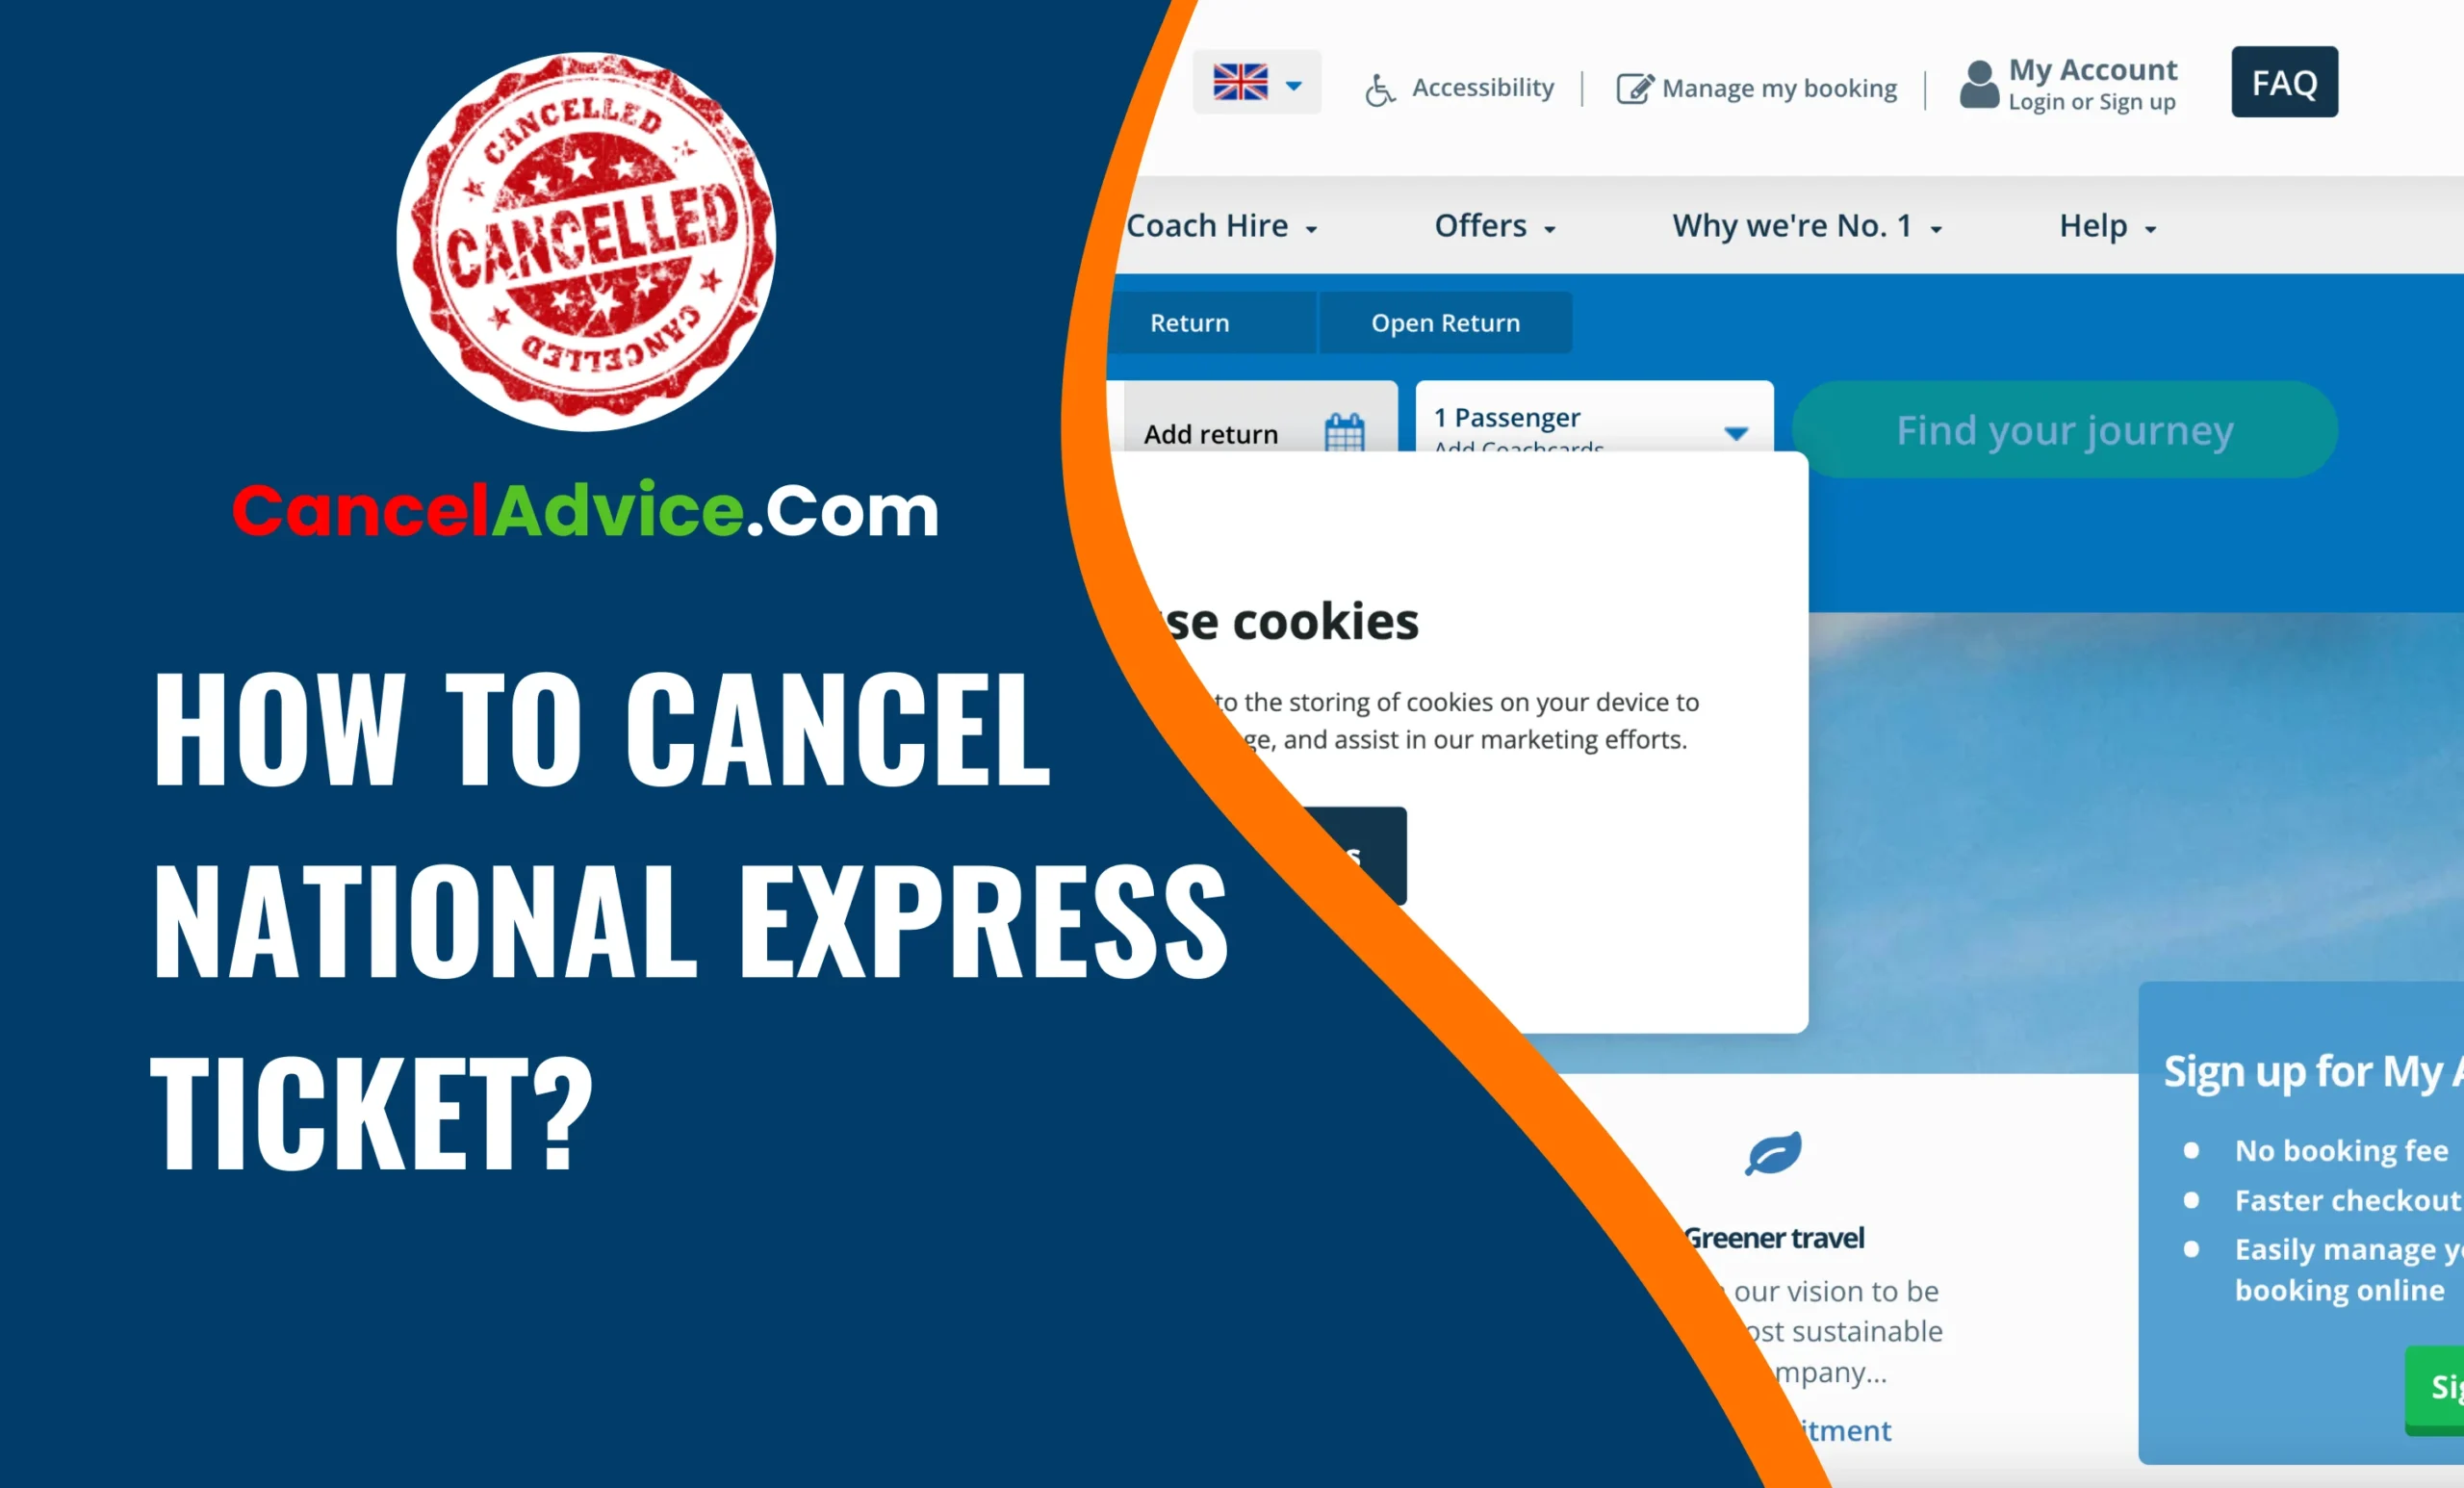 How to Cancel a National Express Ticket